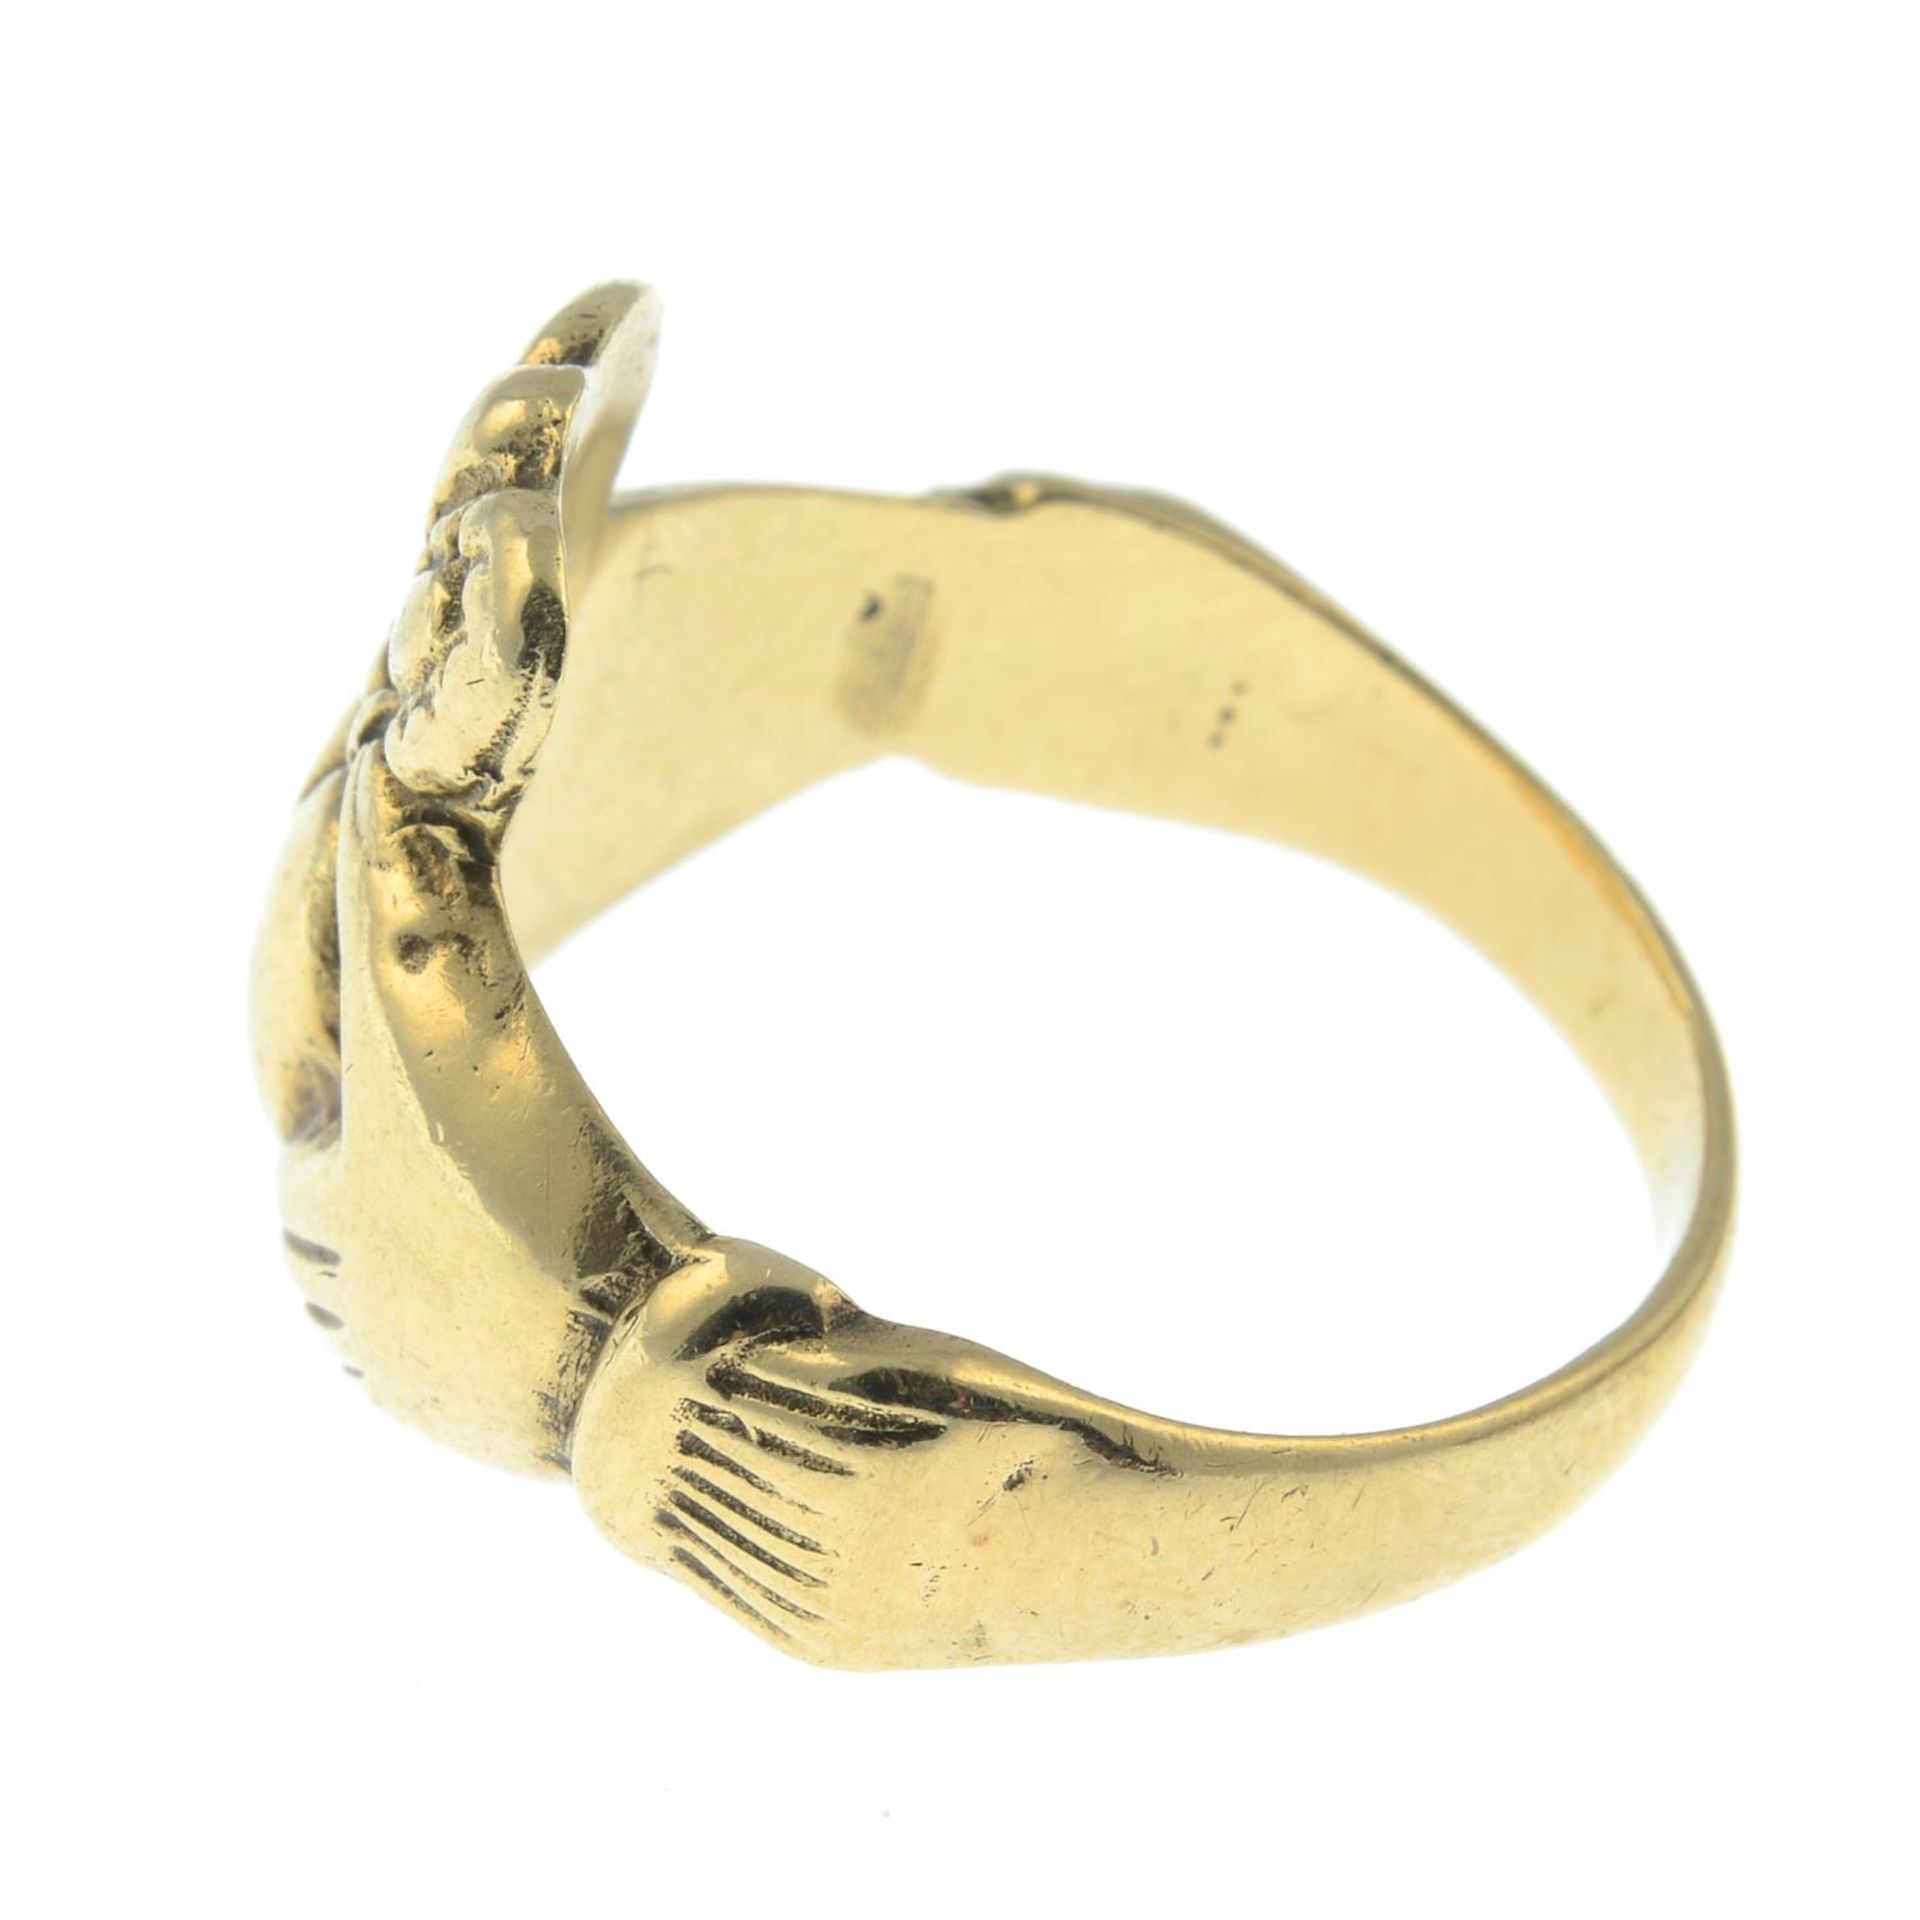 A 9ct gold claddagh ring.Hallmarks for 9ct gold. - Image 3 of 3